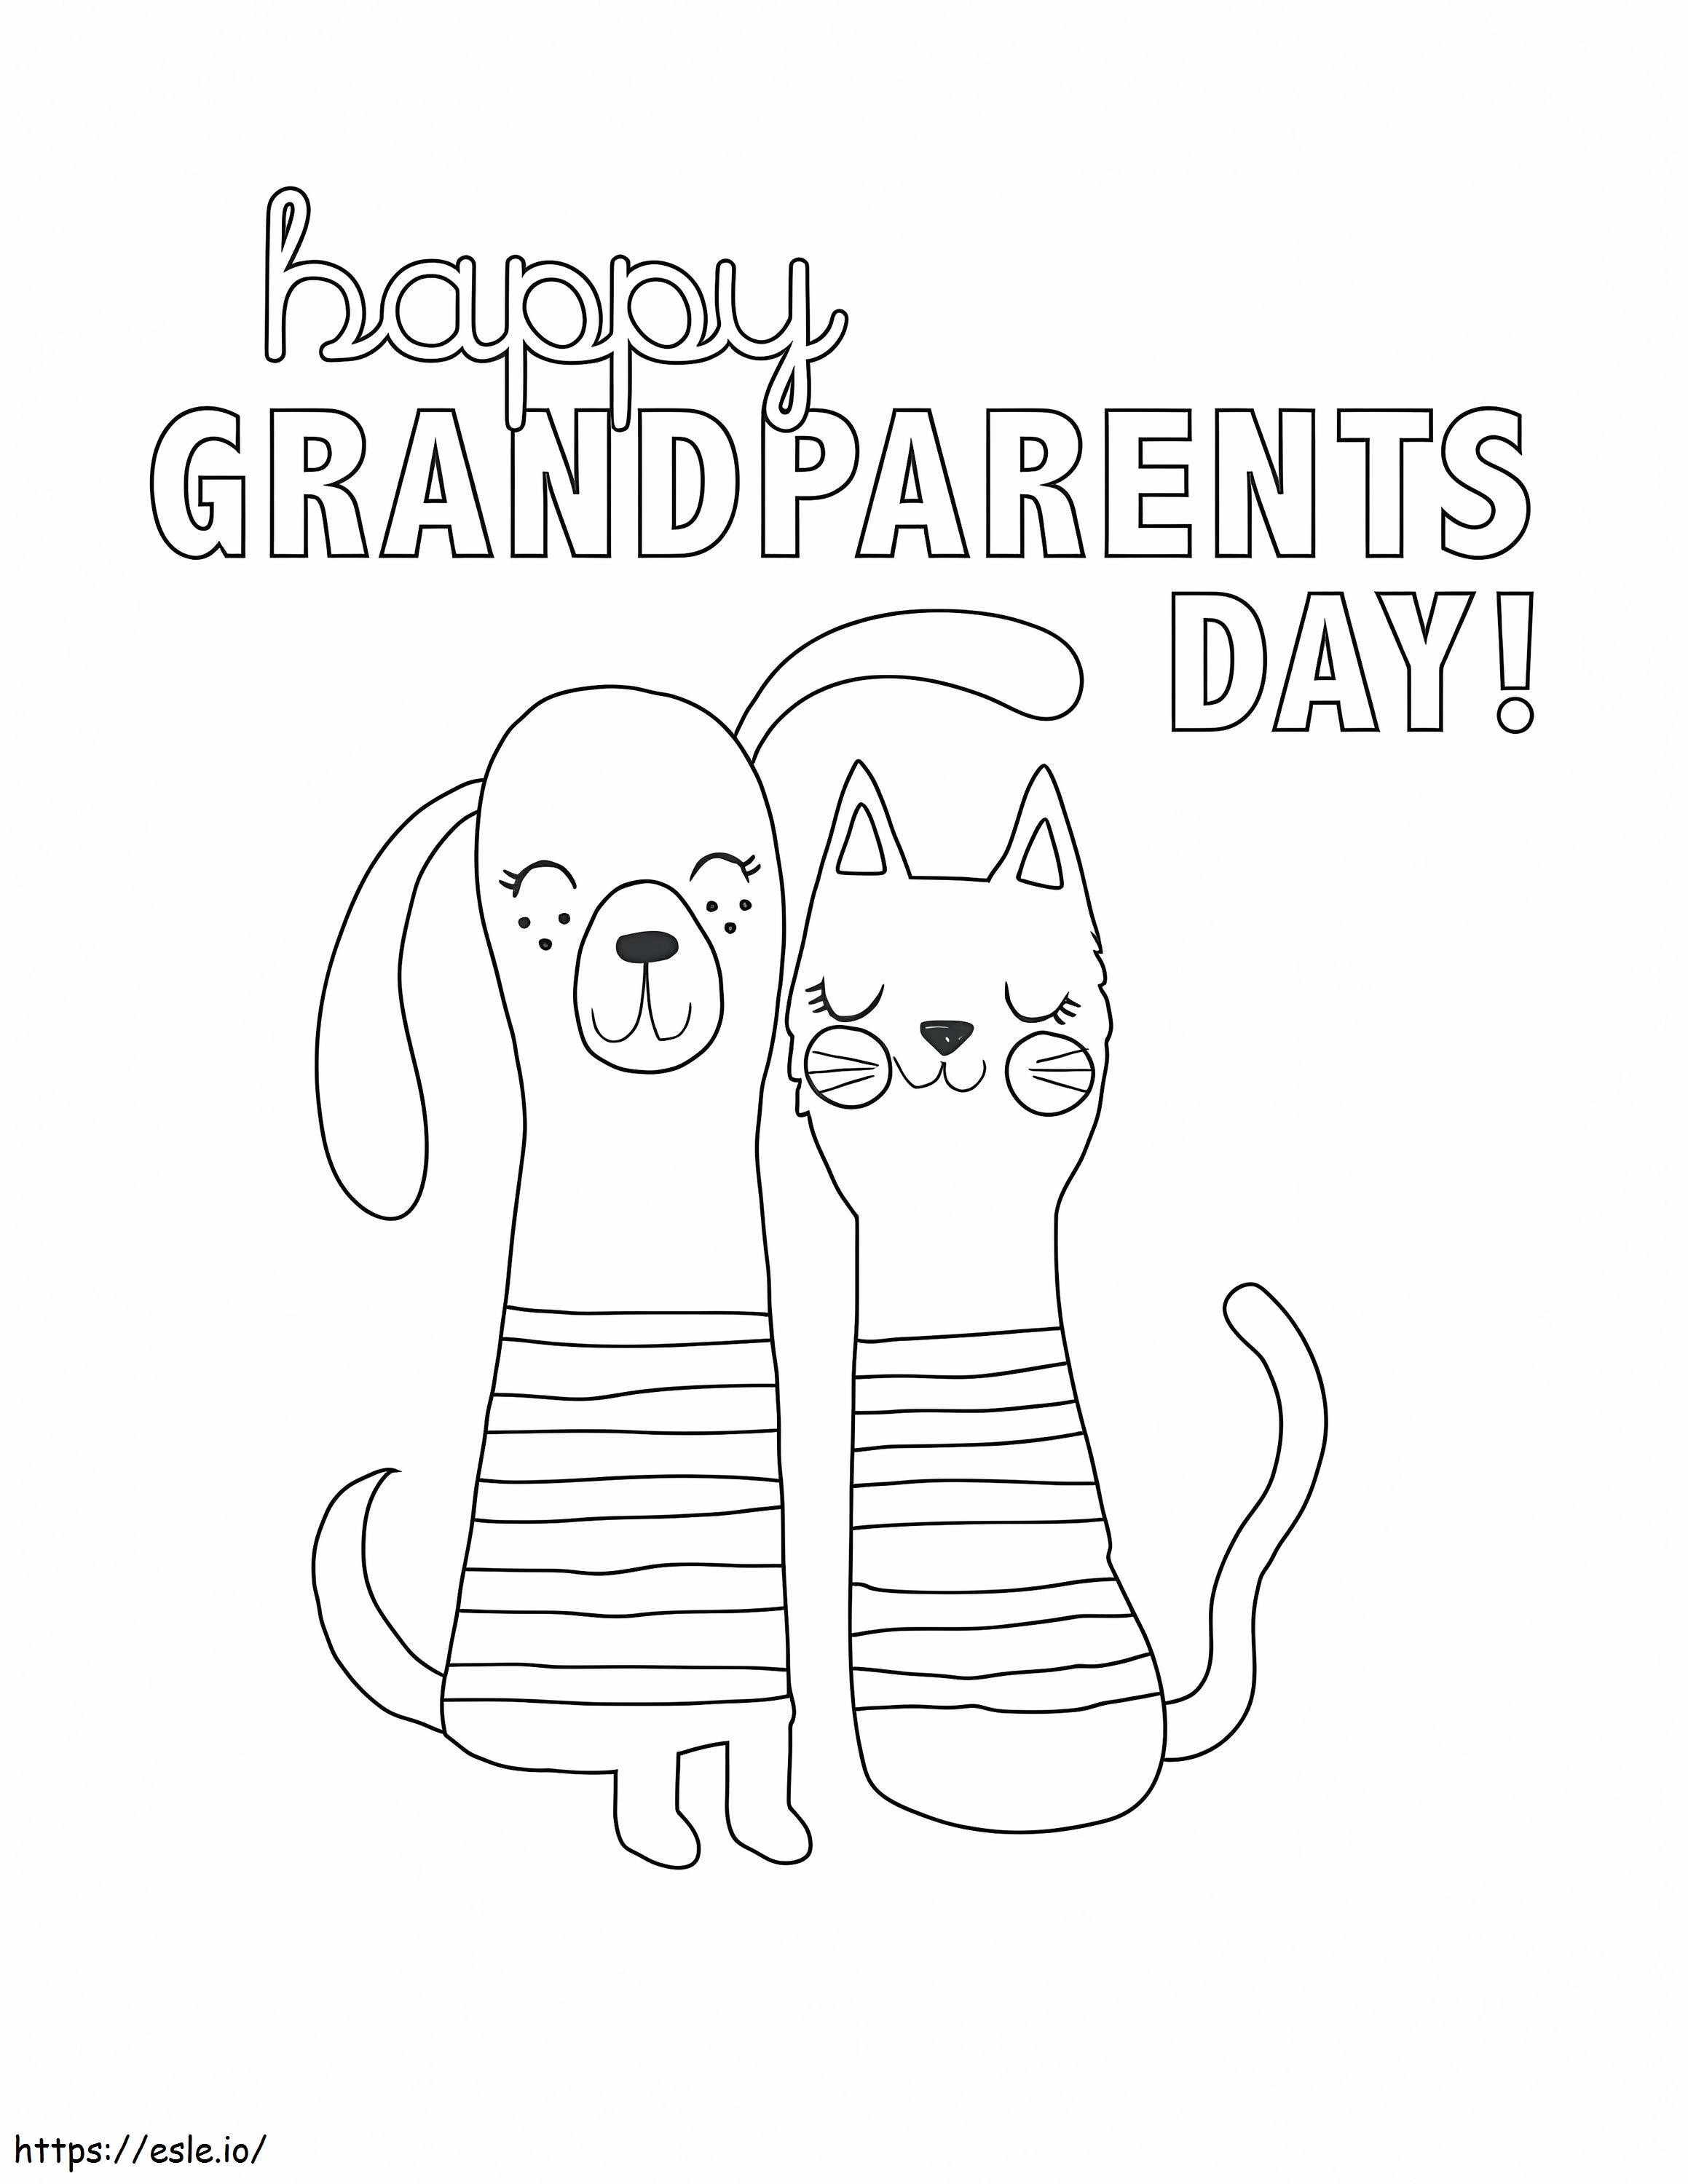 Grandparents Day 3 coloring page